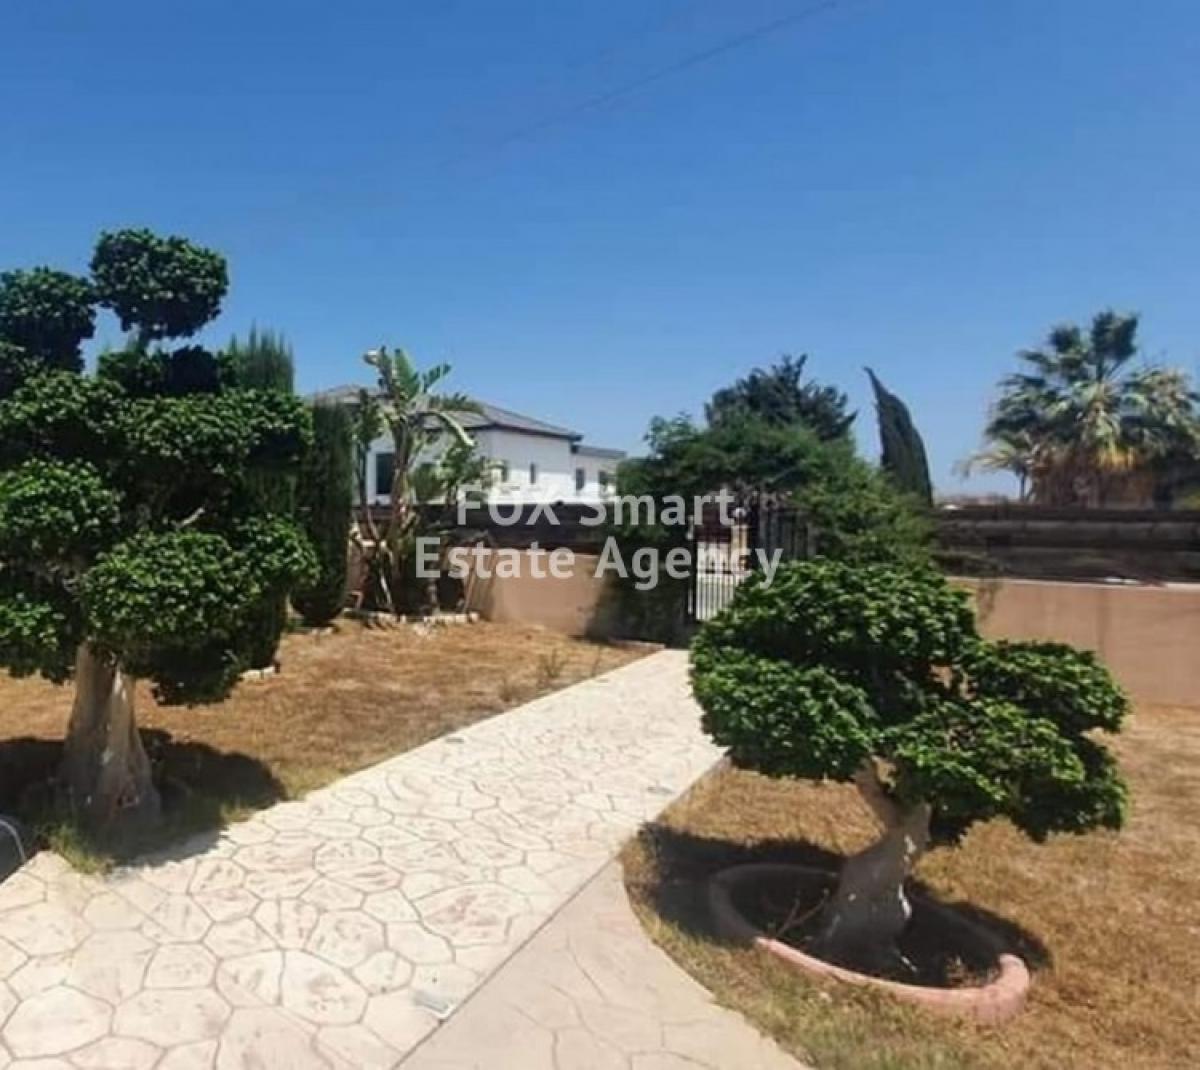 Picture of Bungalow For Sale in Moni, Limassol, Cyprus